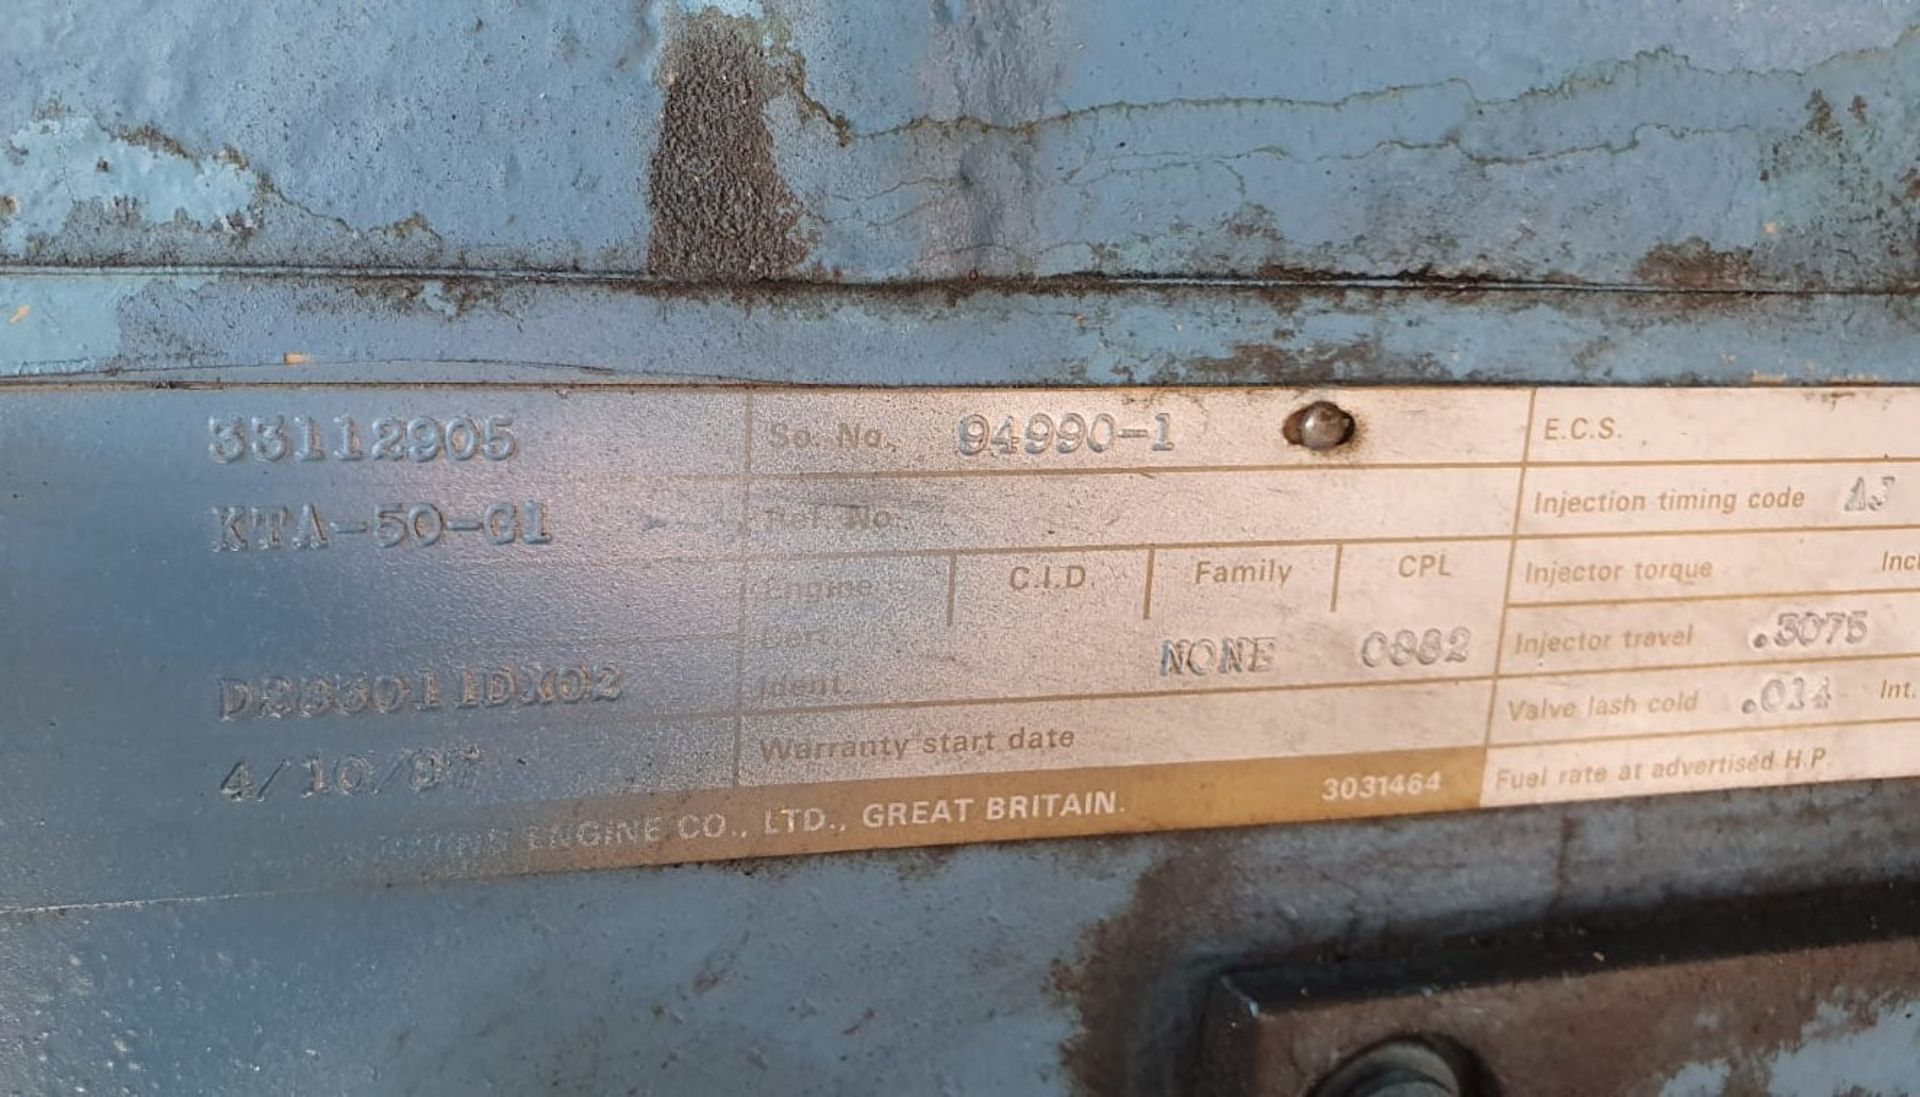 1 x 1987 Hitzinger SGS 9D 040 Generator - Only 800 Hours Use - Ref: T4UB/HZ - CL333 - Location: - Image 7 of 20